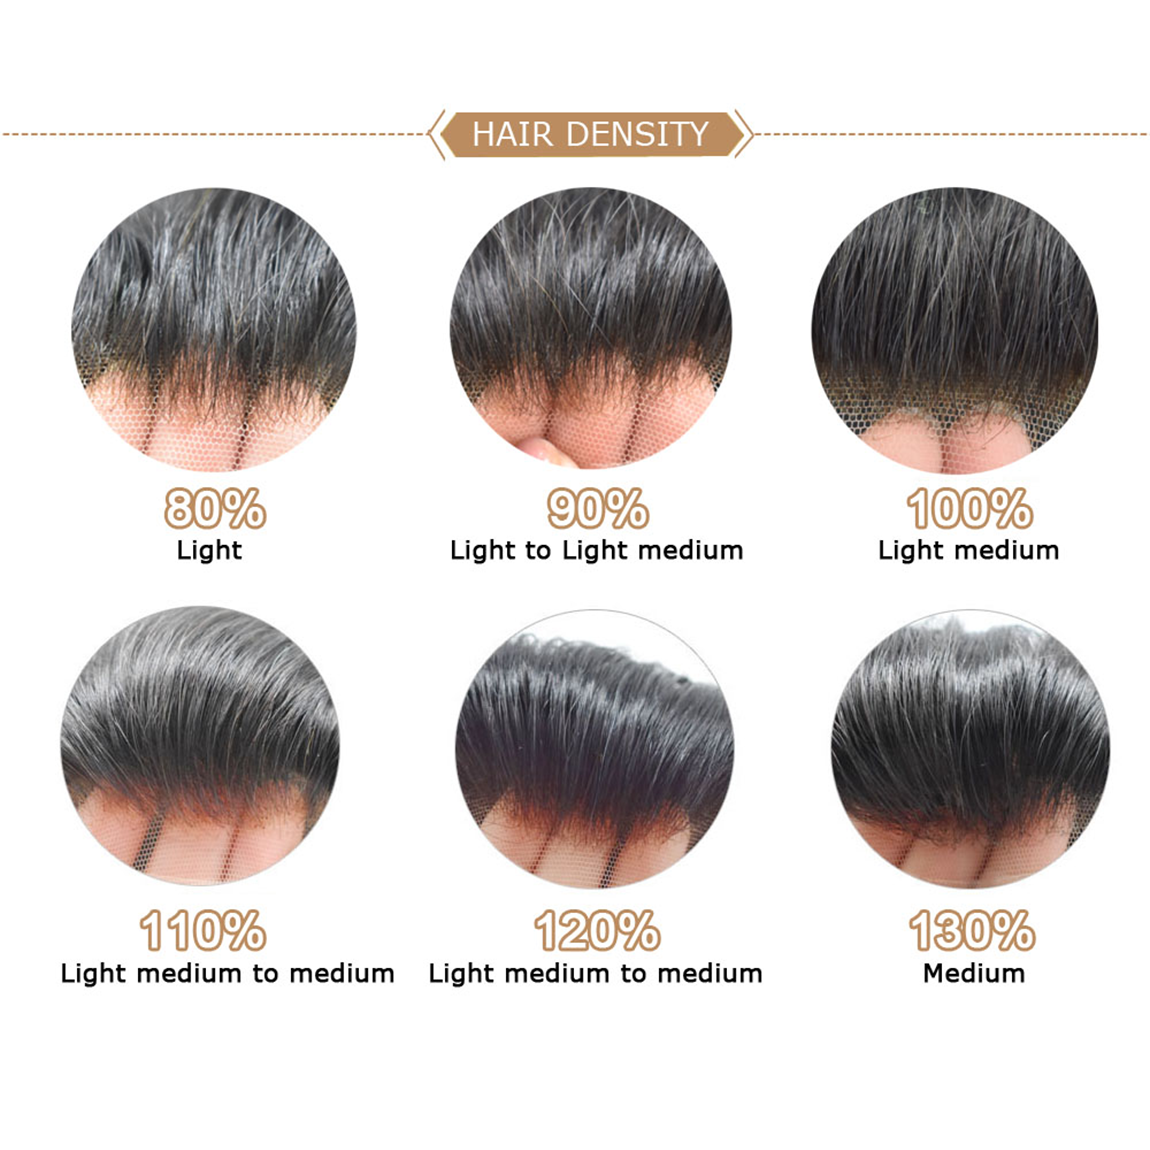 HOW TO CHOOSE THE RIGHT HAIR DENSITY FOR MEN